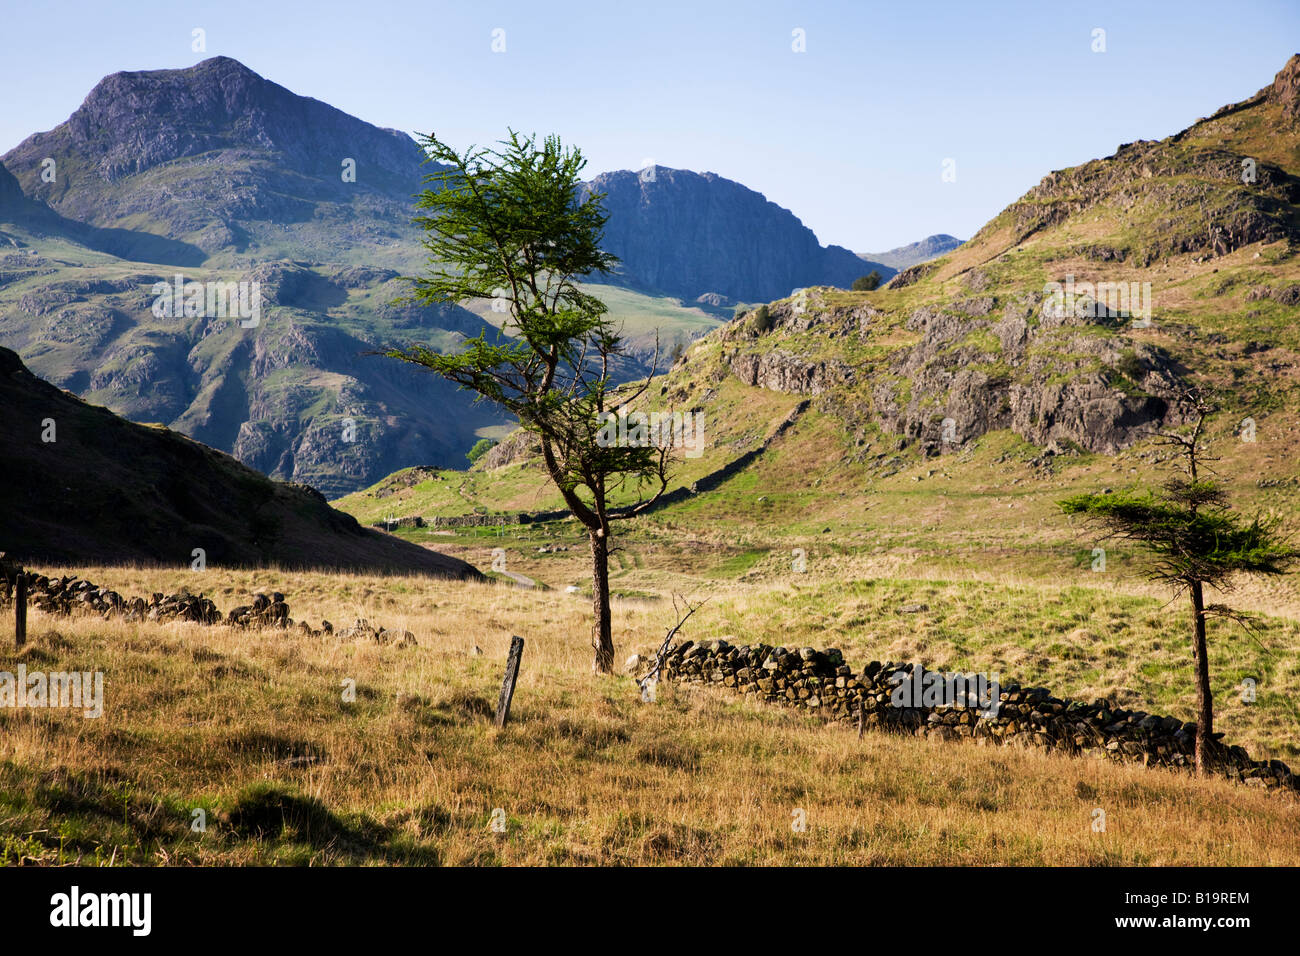 The 'Langdale Pikes' Seen In The Distance As Viewed From Blea Tarn, The 'Lake District' Cumbria England UK Stock Photo